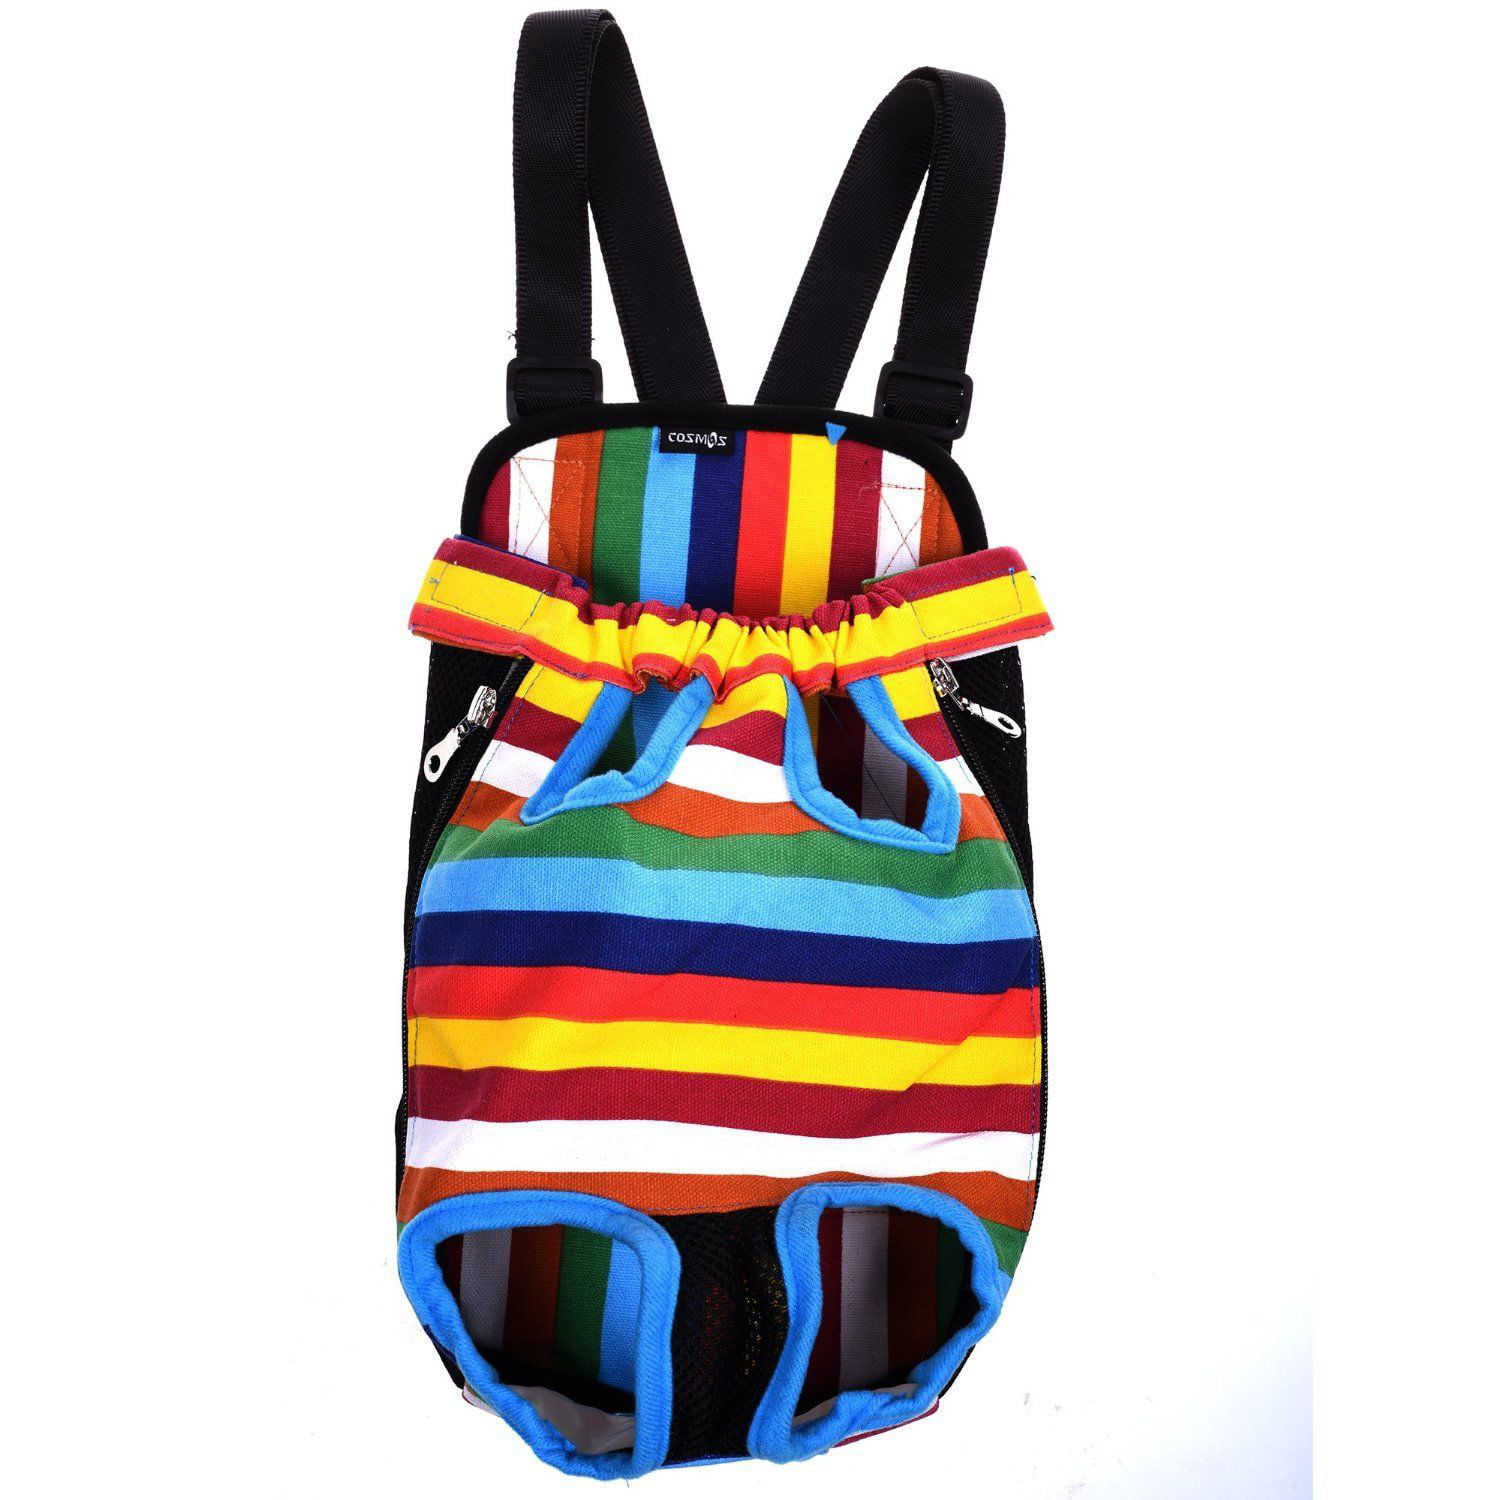 Nylon Mesh Pet Puppy Dog Cat Carrier Backpack Front Net Bag Tote Sling Carrier-Rainbow choice ...